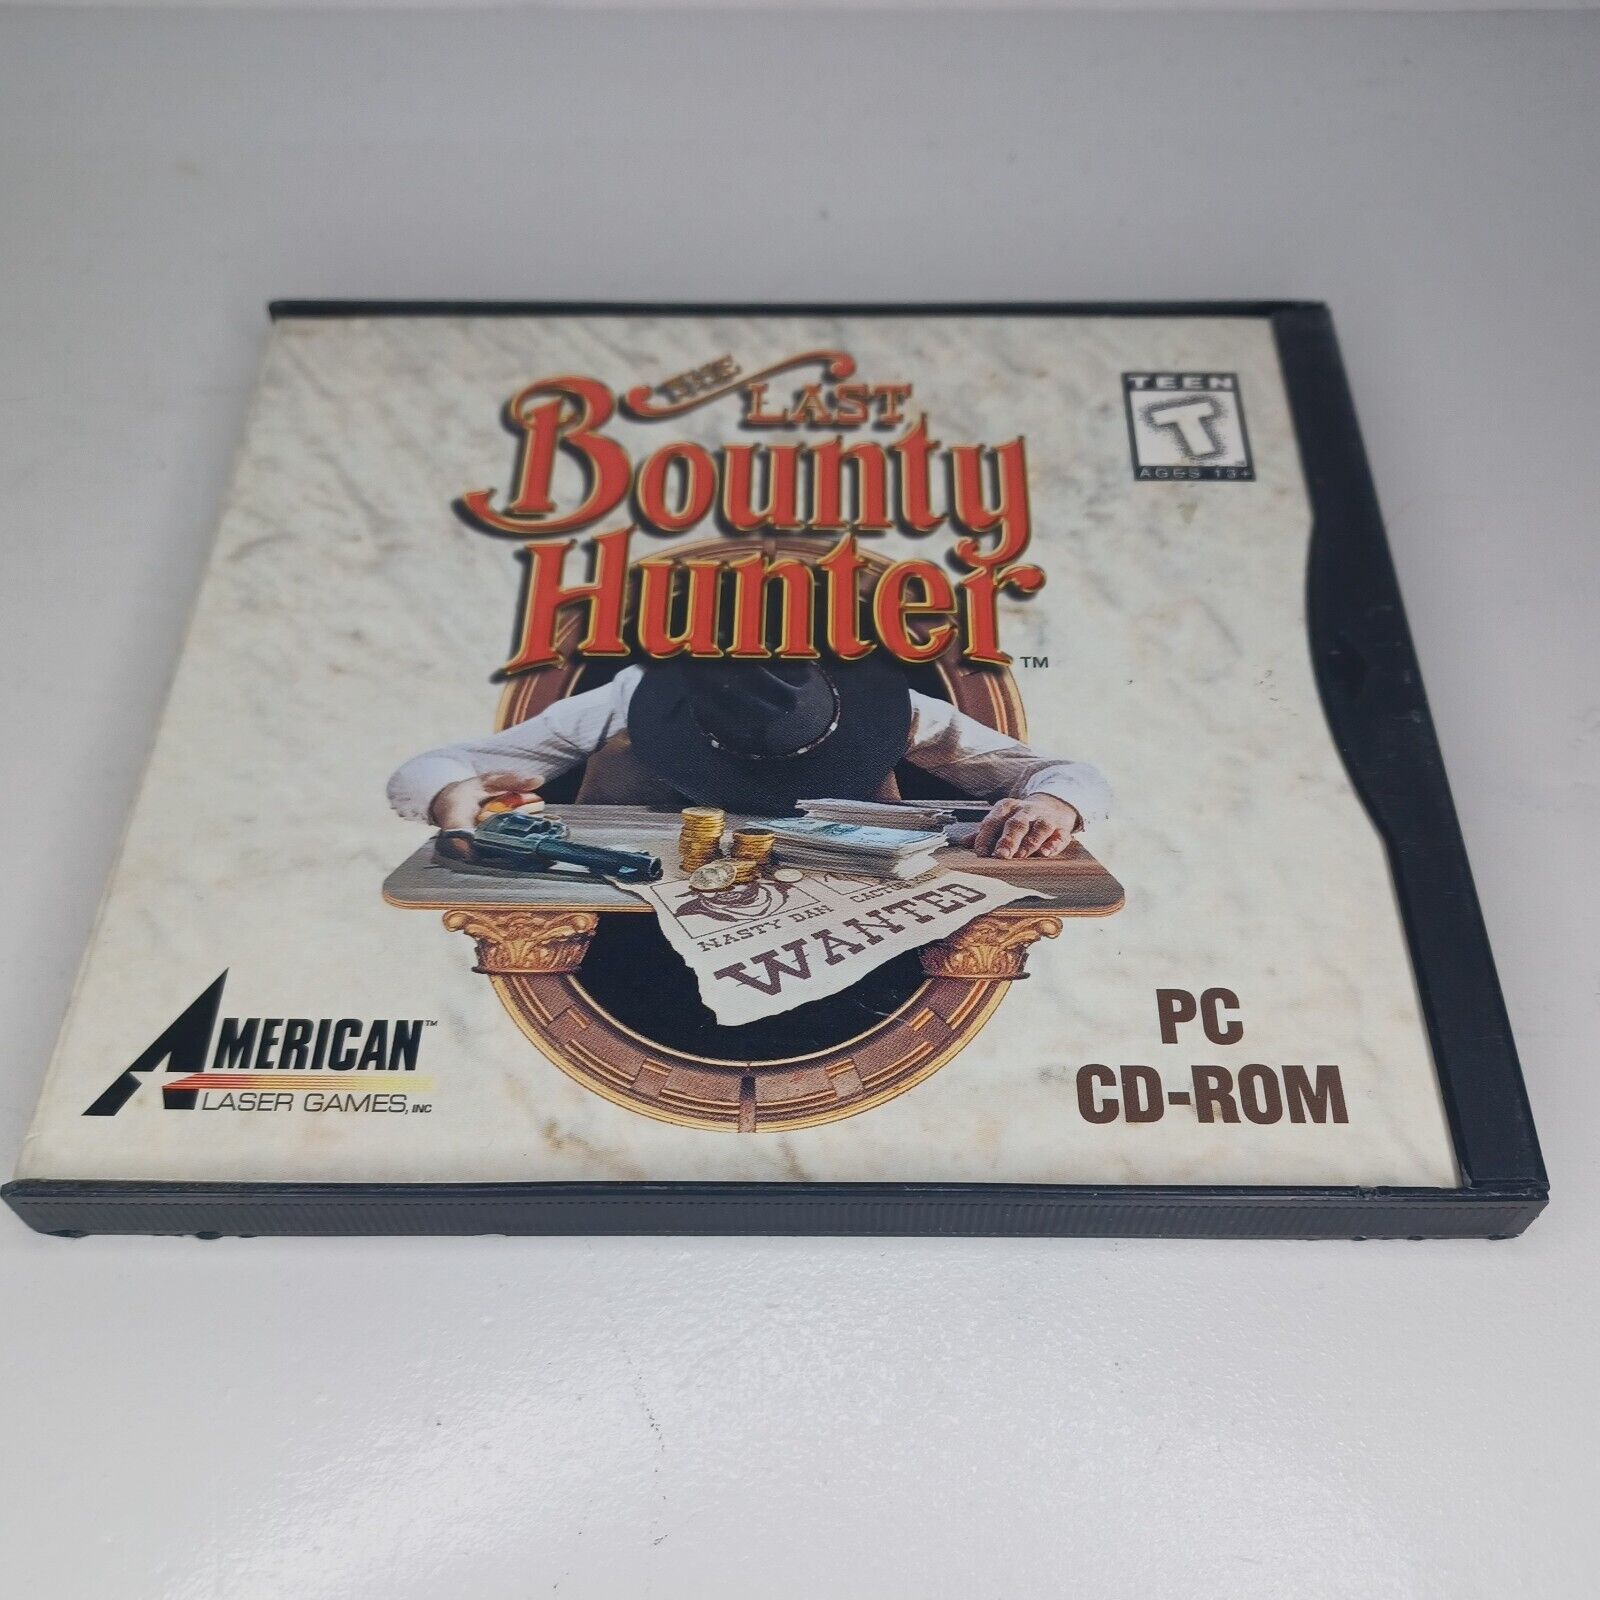 The Last Bounty Hunter PC CD-ROM Game 1994 American Laser Shooter Western Tucson